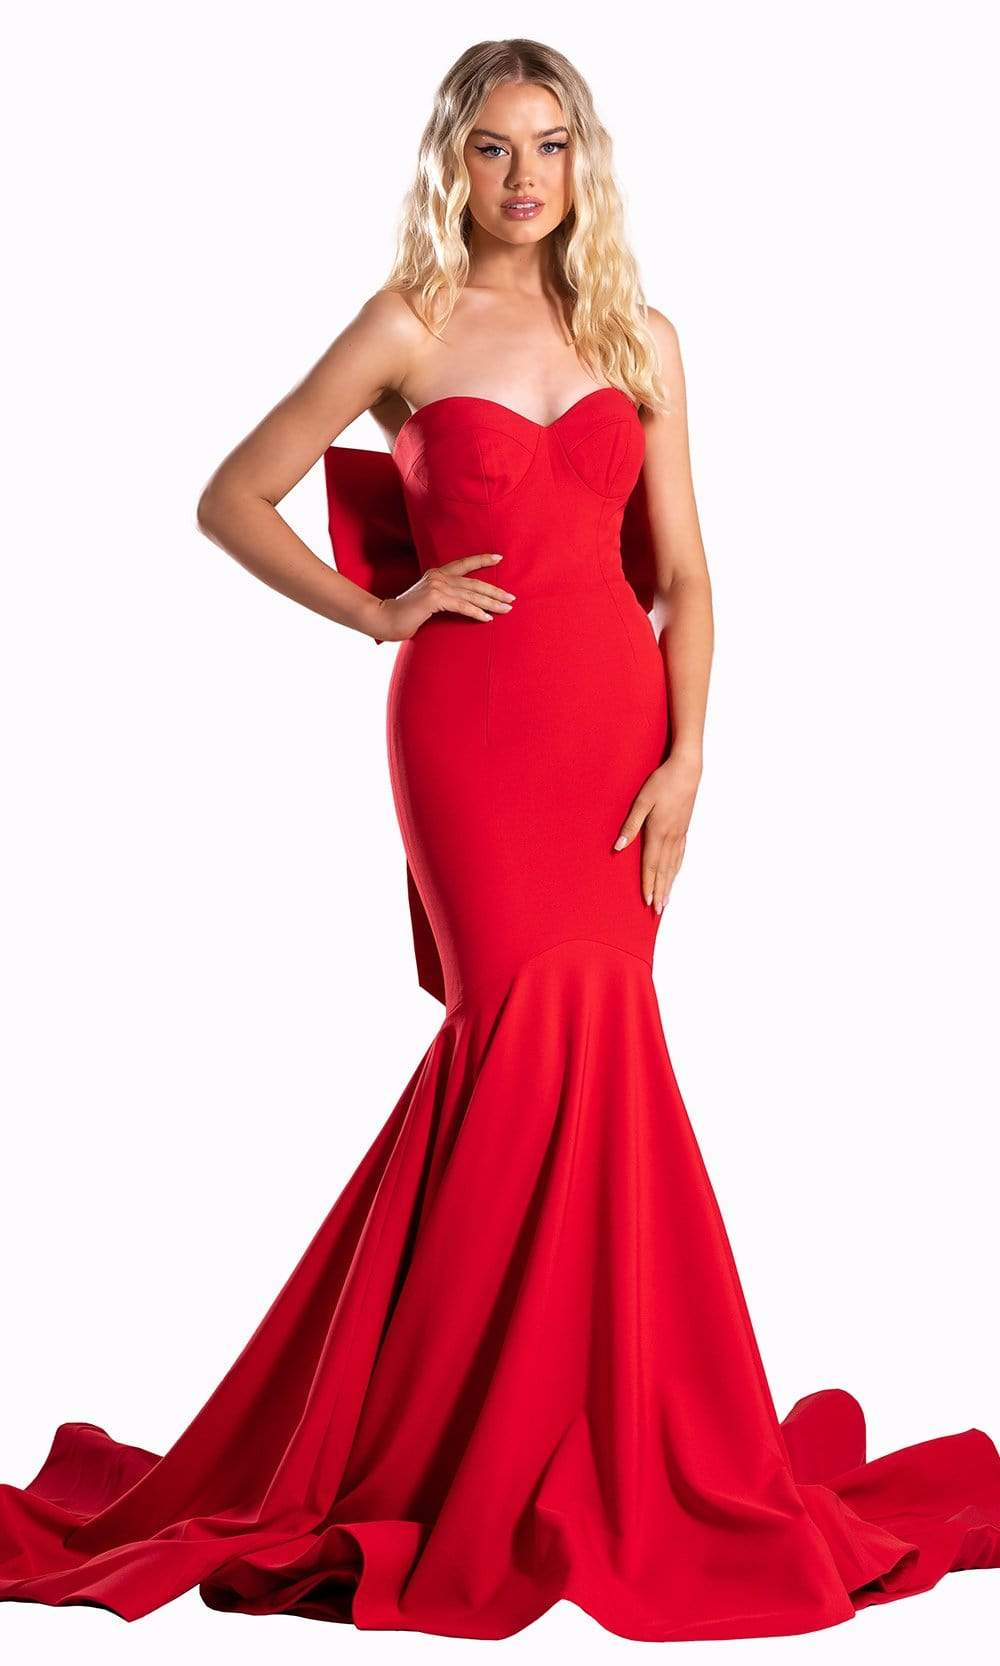 Portia and Scarlett - PS21005 Bow Accented Back Mermaid Gown
